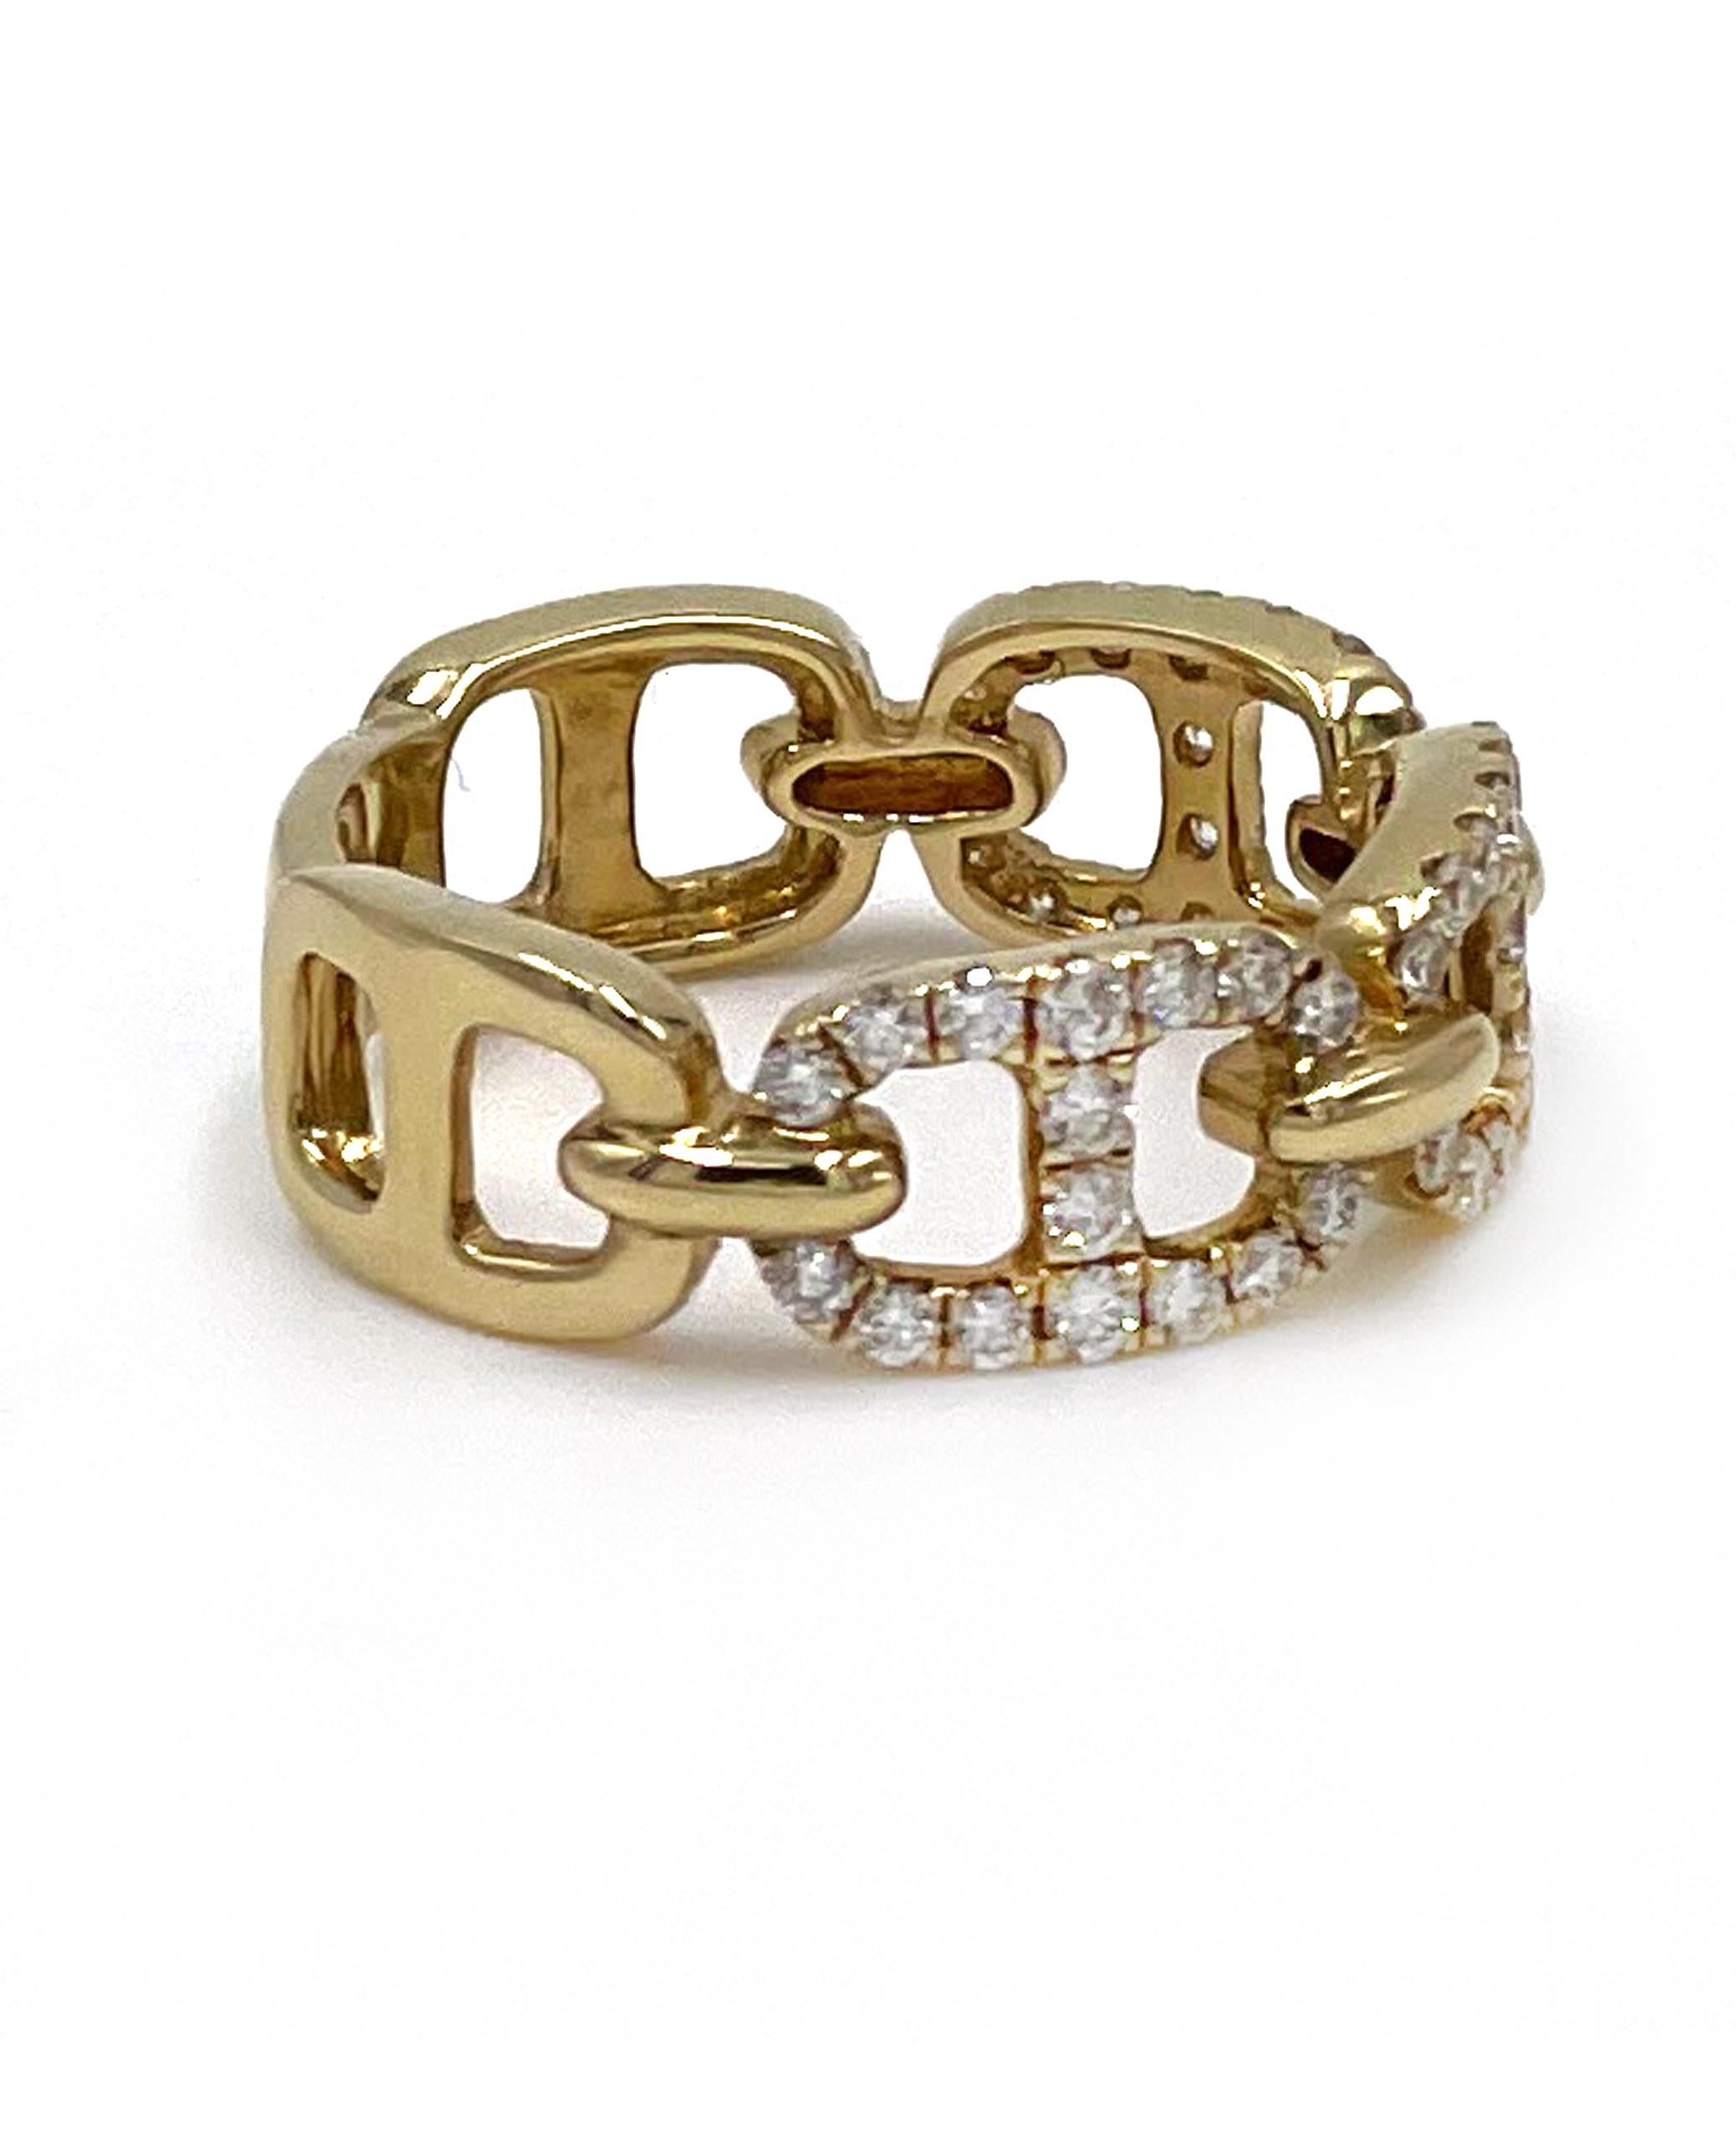 18K yellow gold ring with 48 round brilliant-cut diamonds totaling 0.55 carats.\

* Diamonds are G/H color, SI clarity.